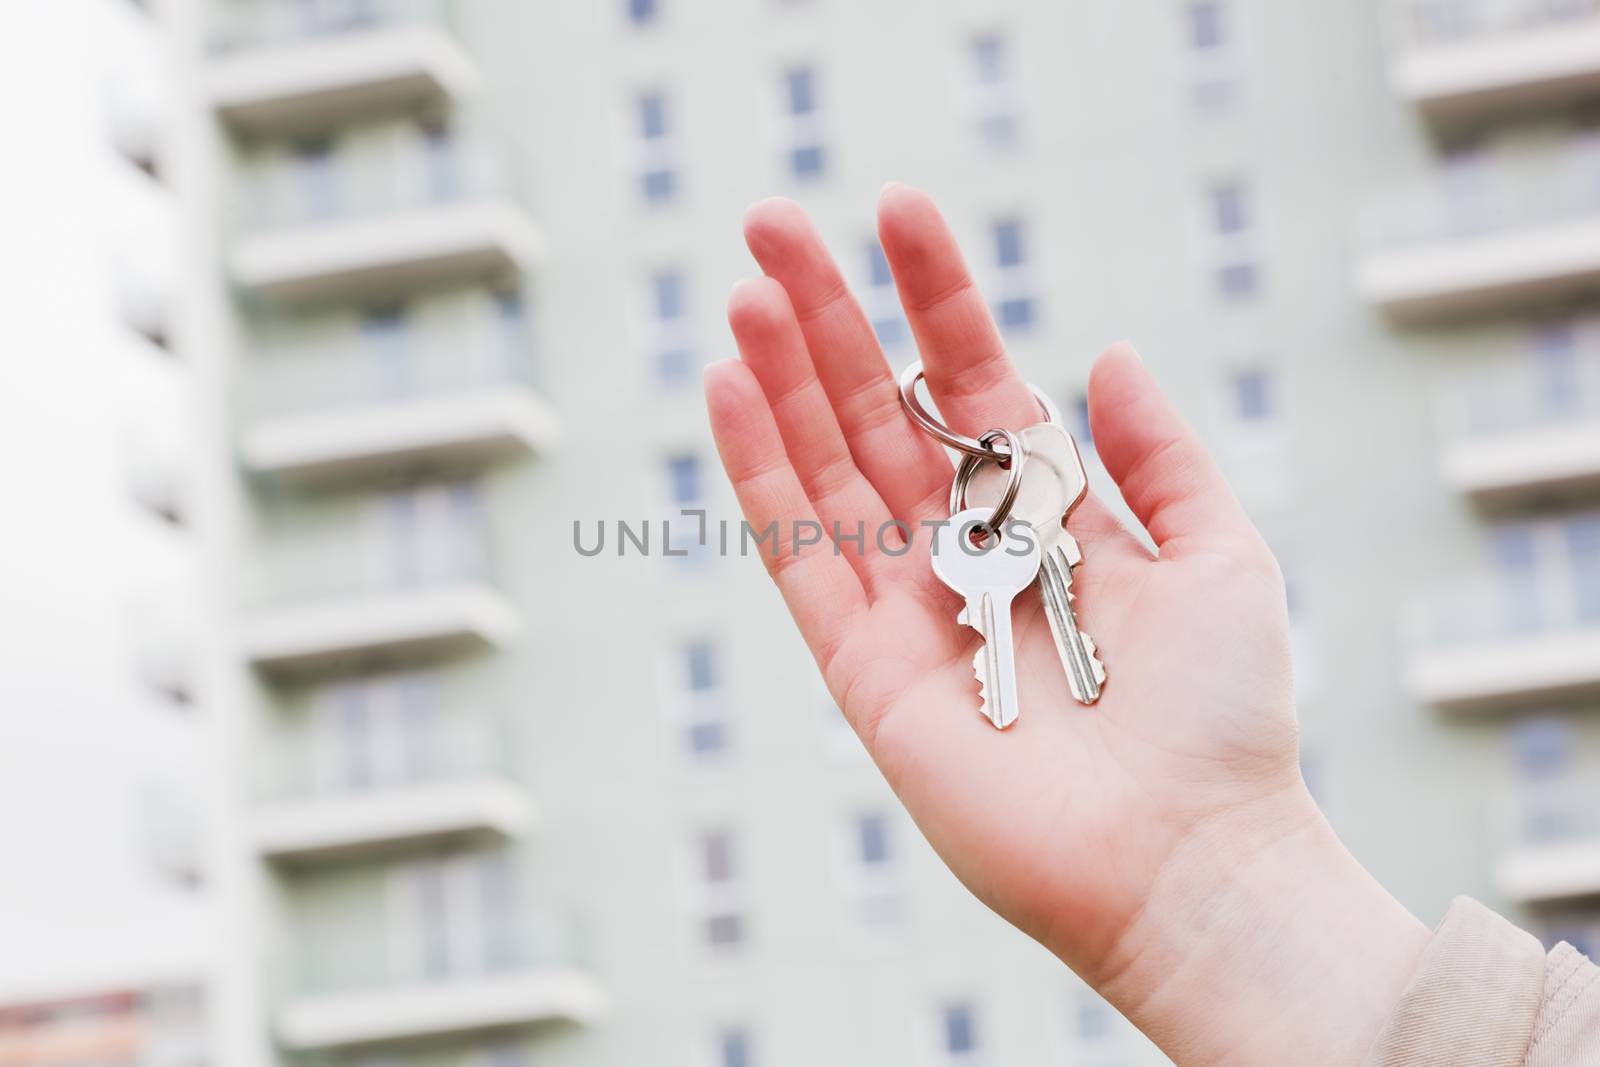 A real estate agent holding keys to a new apartment in her hands. Real estate industry